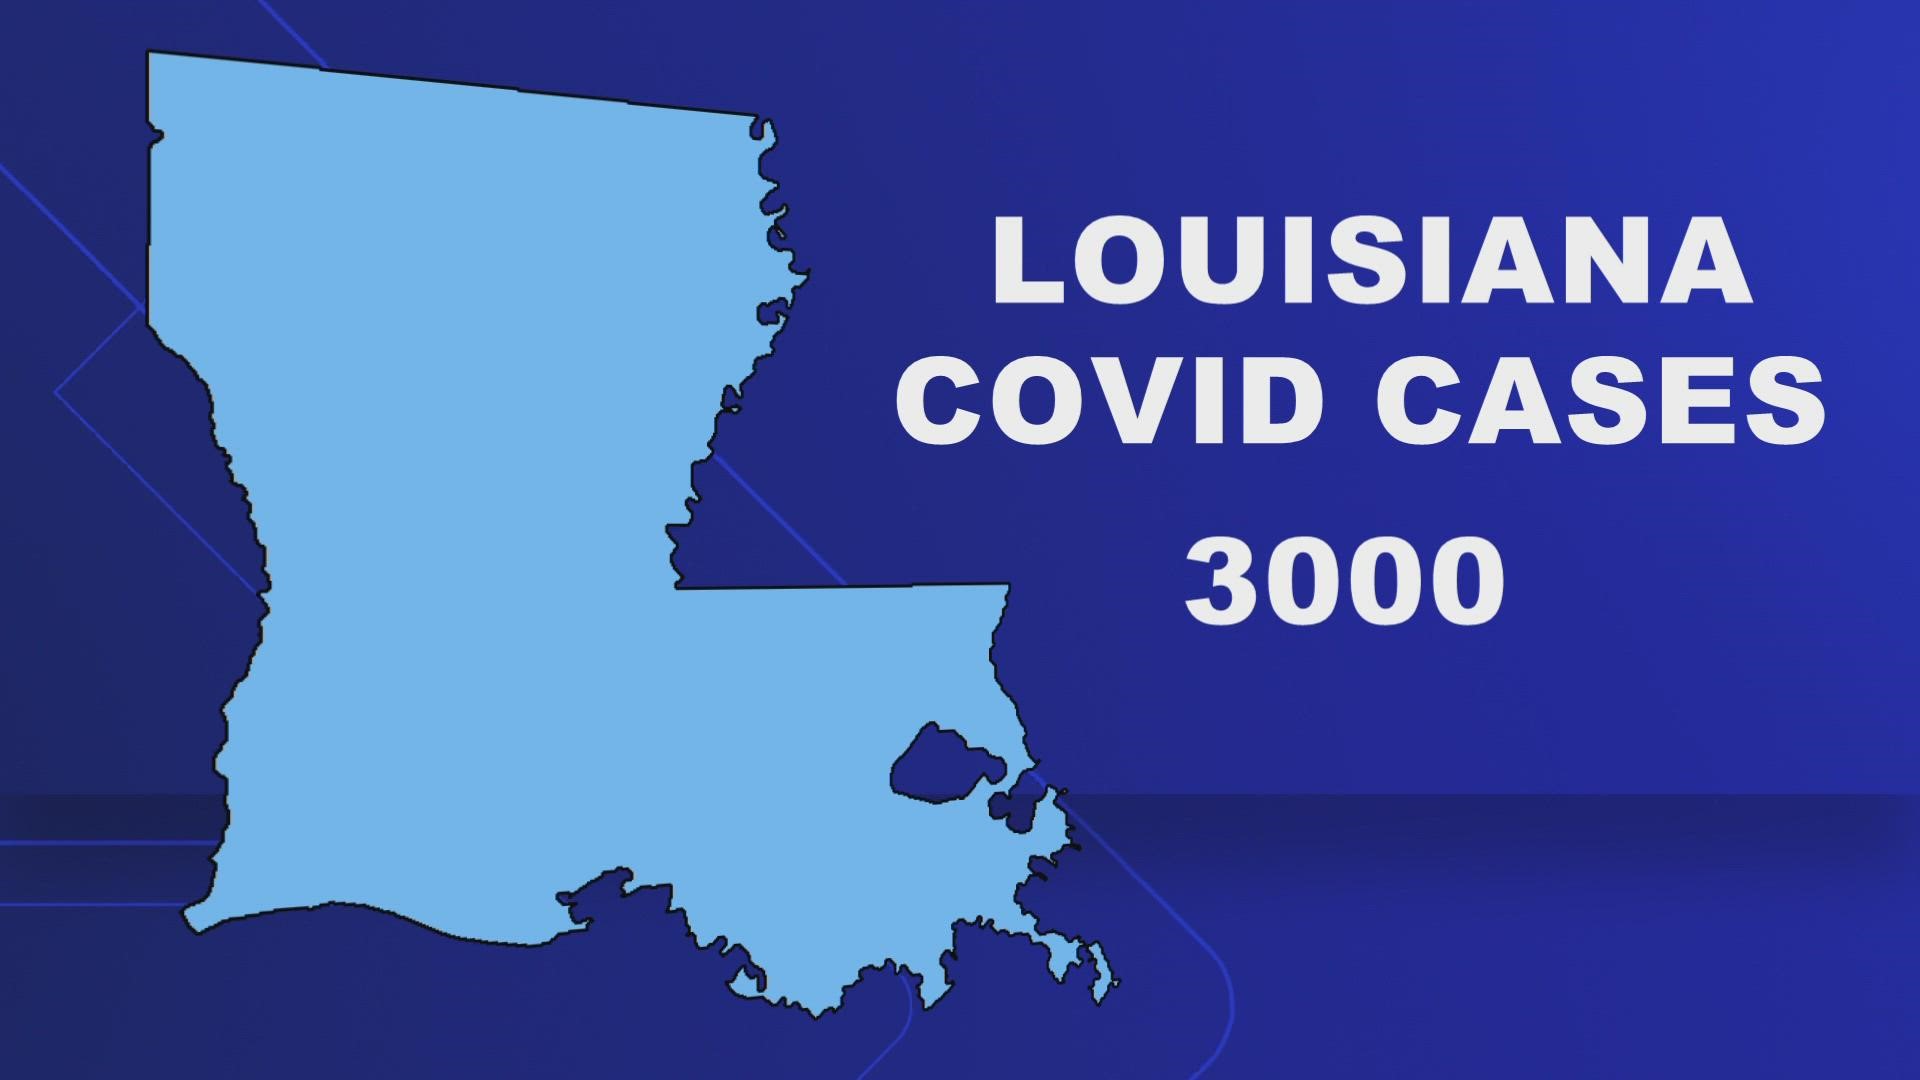 There are currently thousands of cases of COVID in Louisiana and the numbers are likely underreported, but, few are severe.